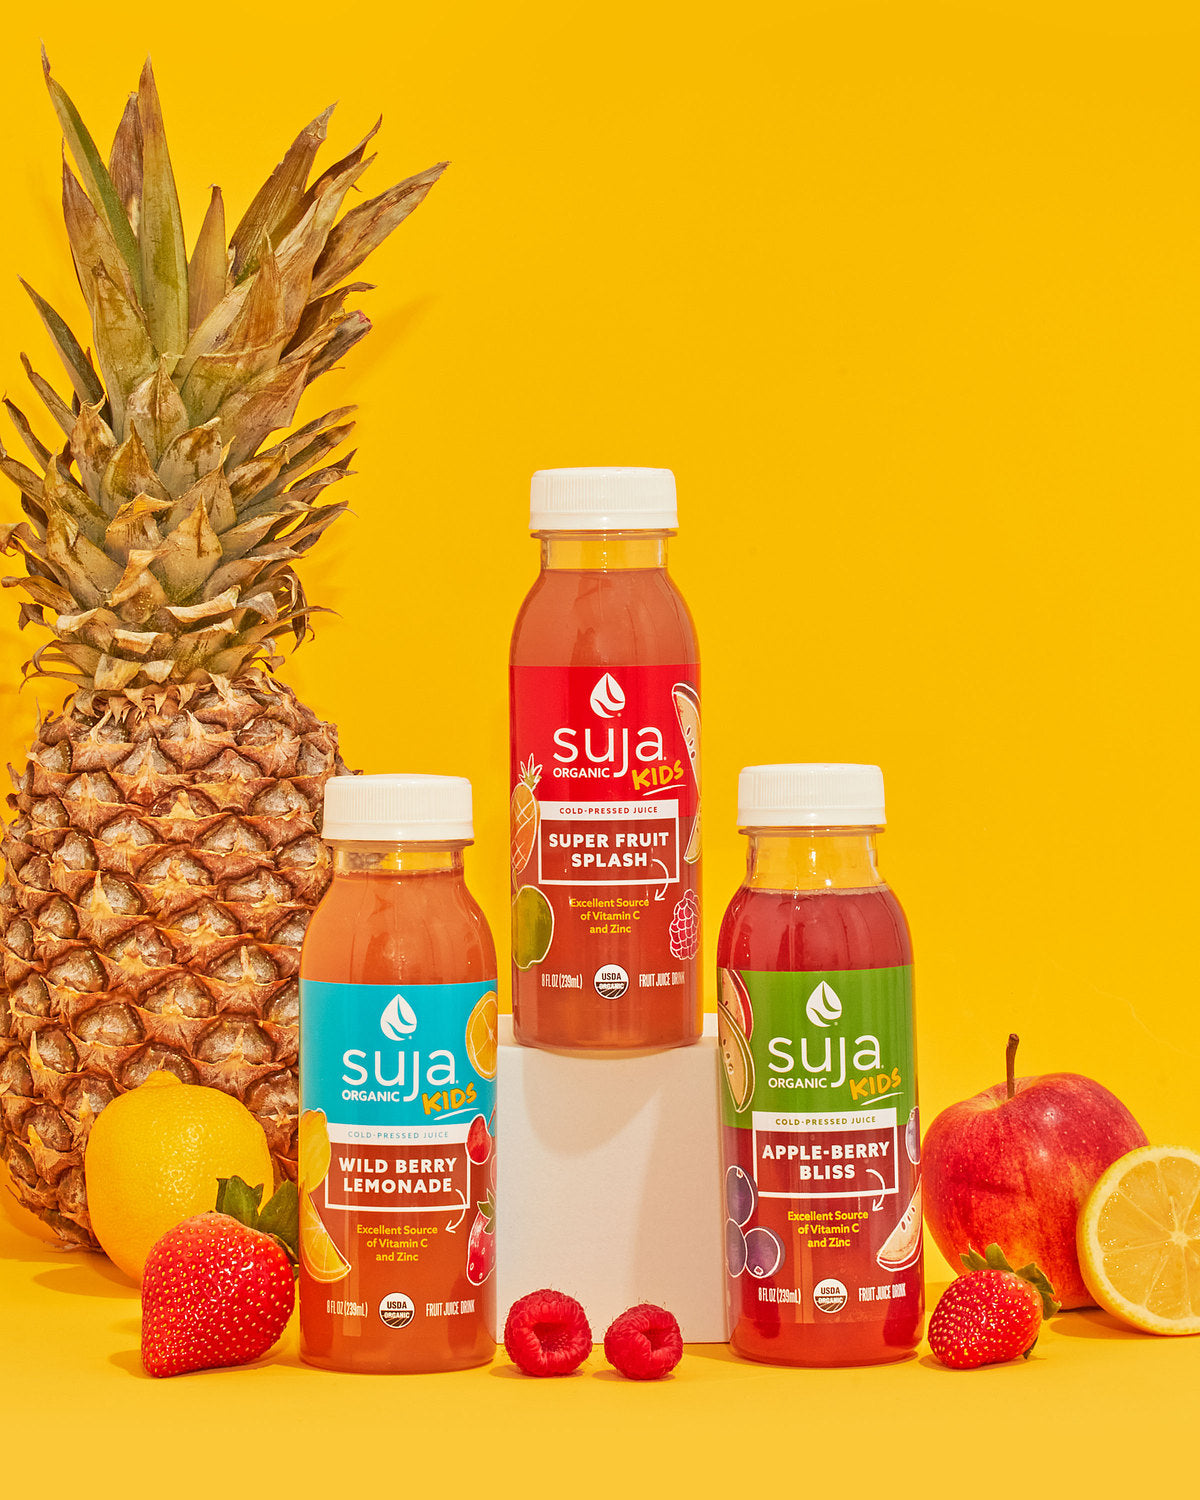 Suja kids bottles with pineapple and other fresh fruits